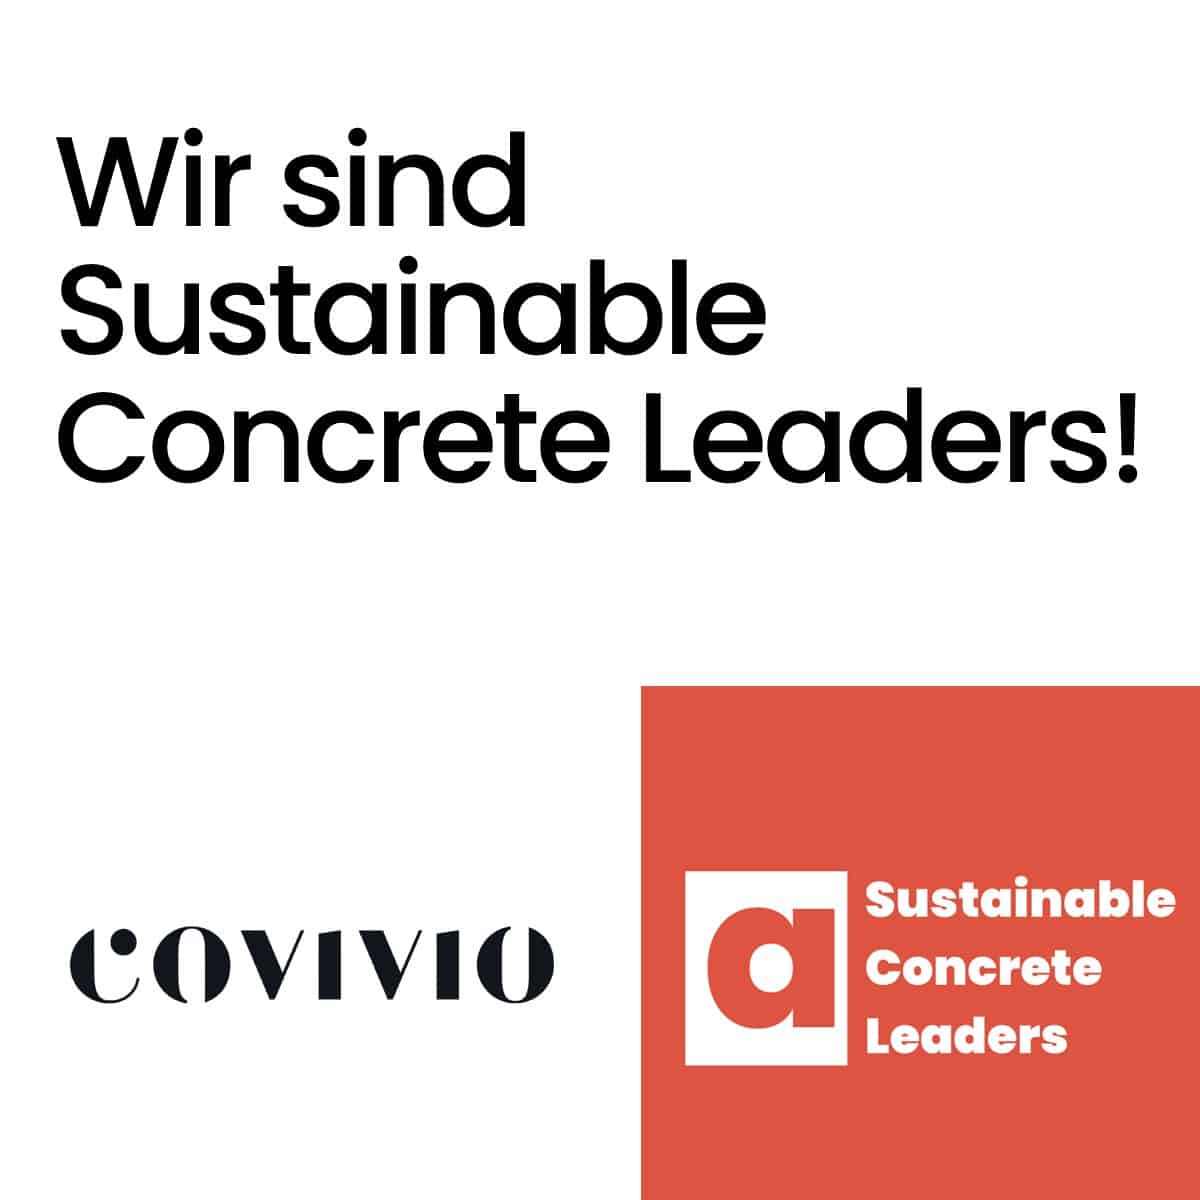 We are "Sustainable Concrete Leaders"